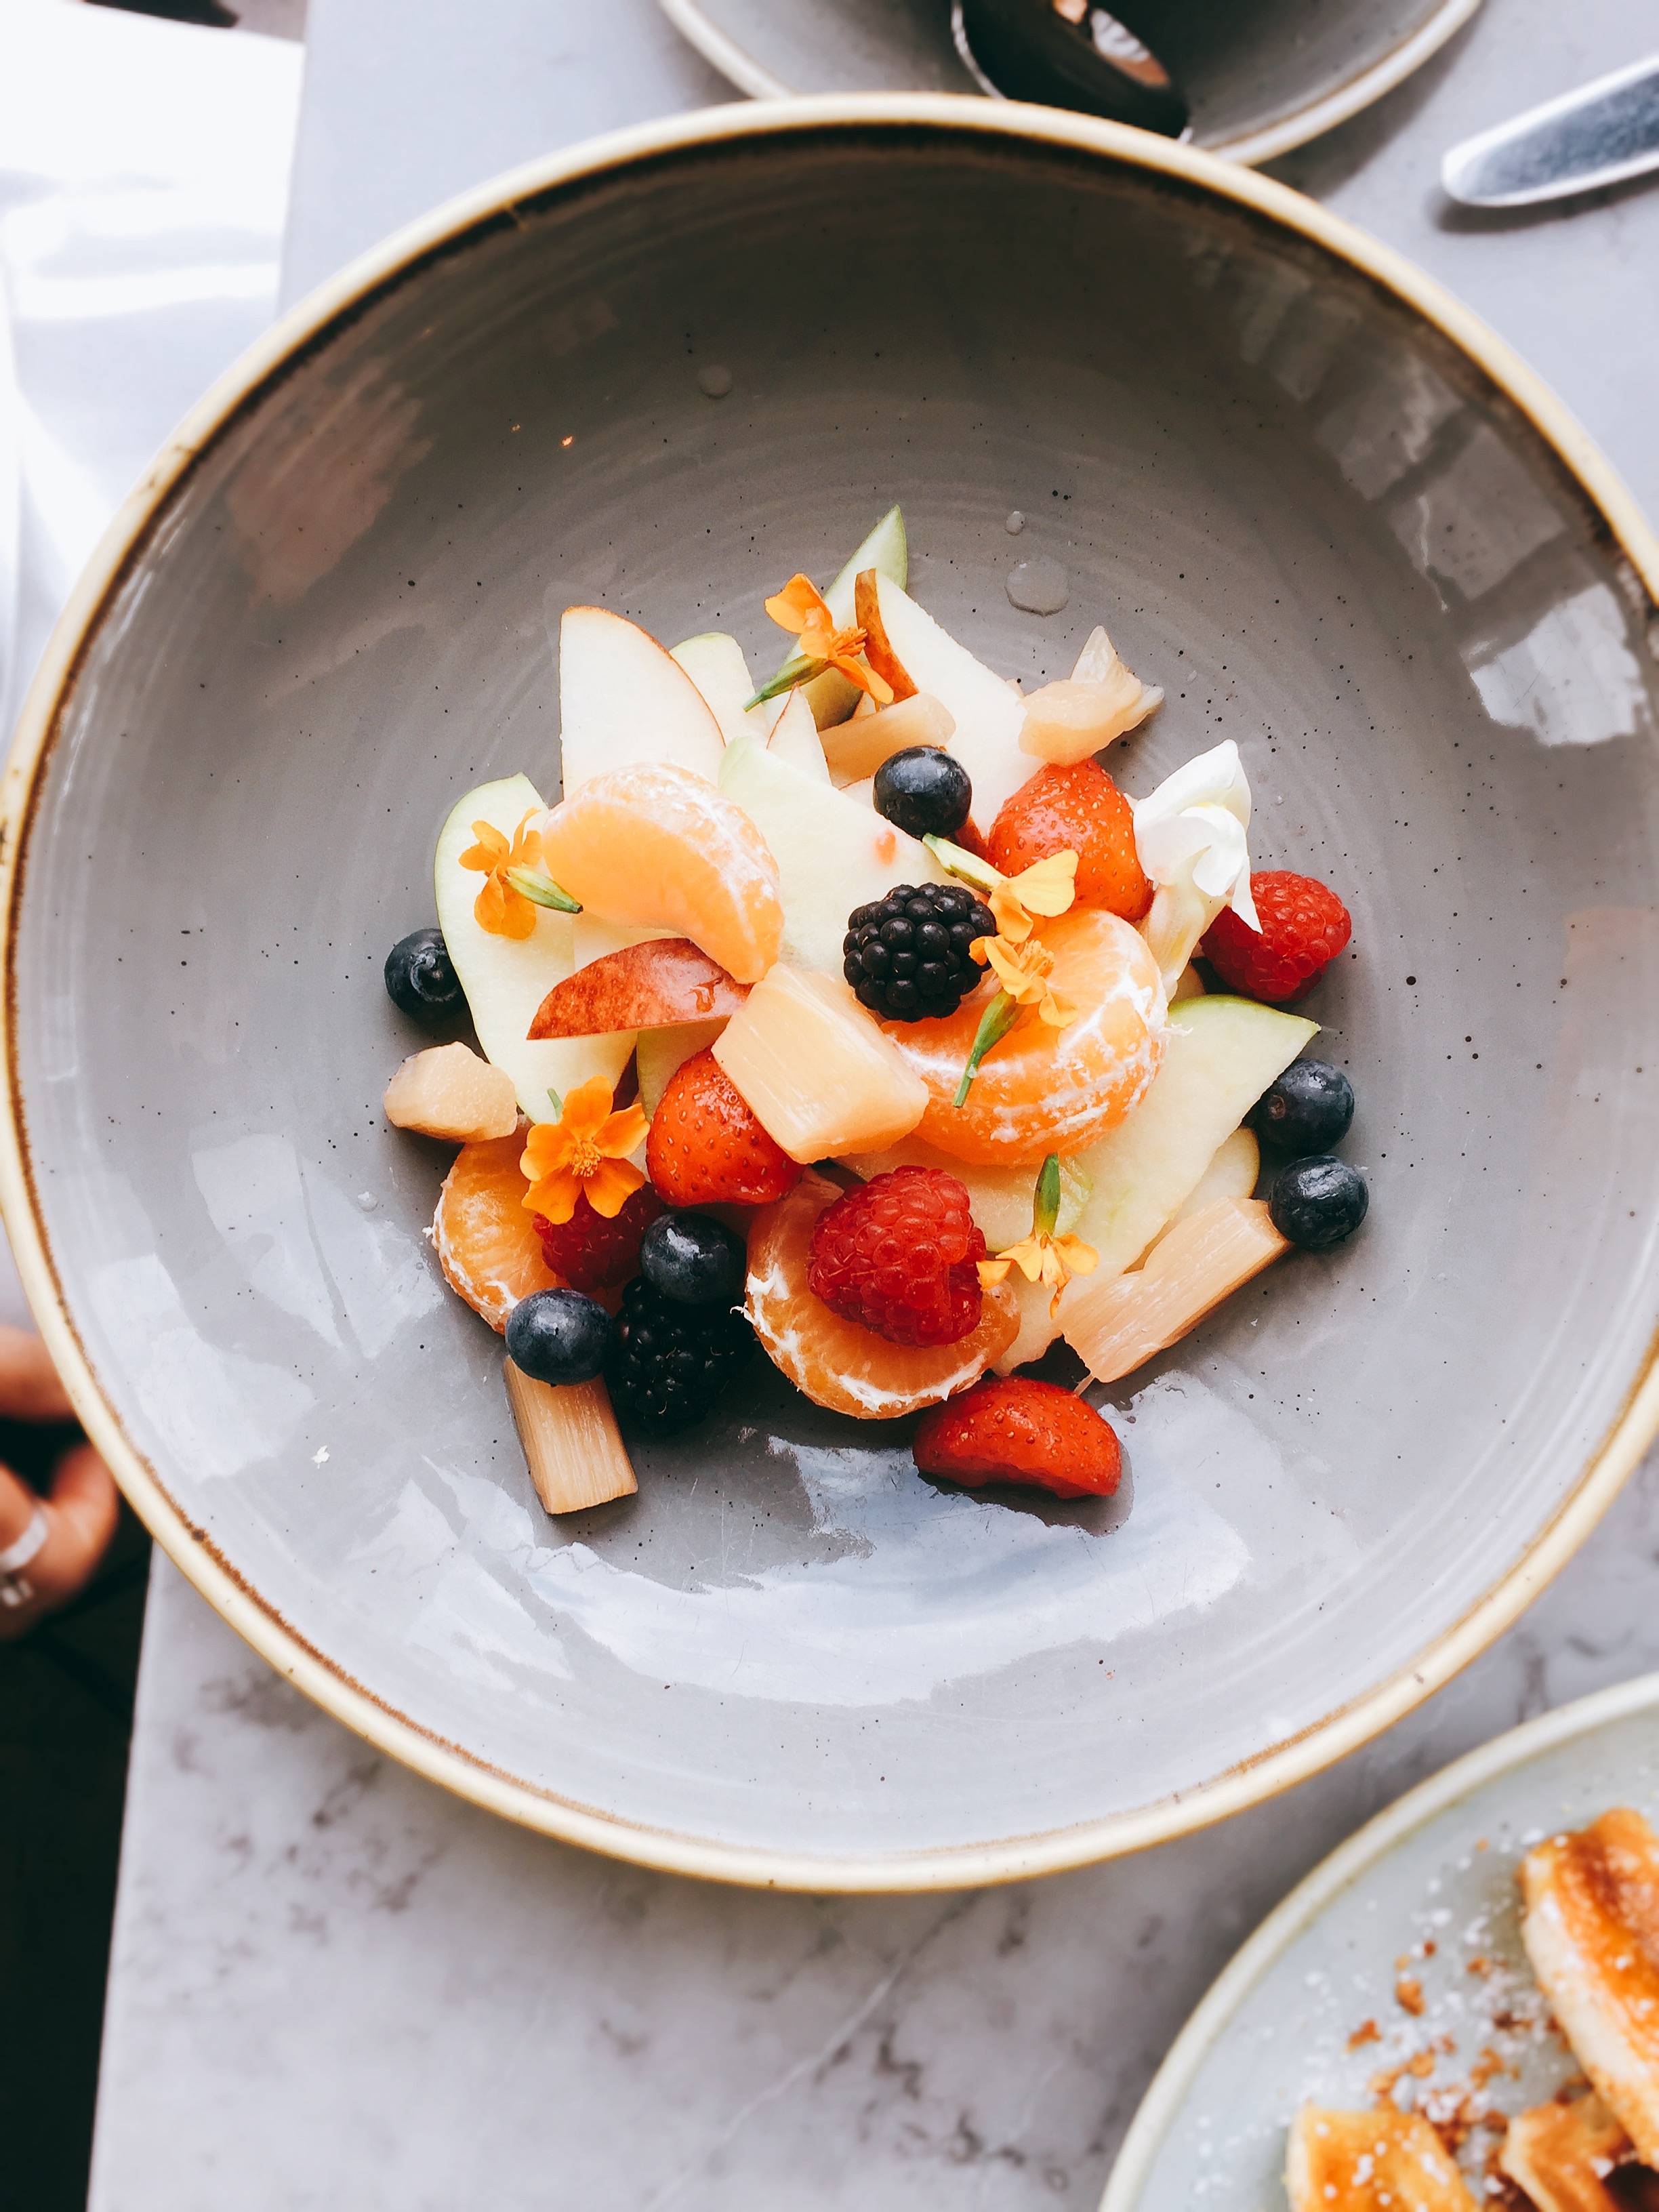 Fruit salad - Duck and Waffle restaurant review